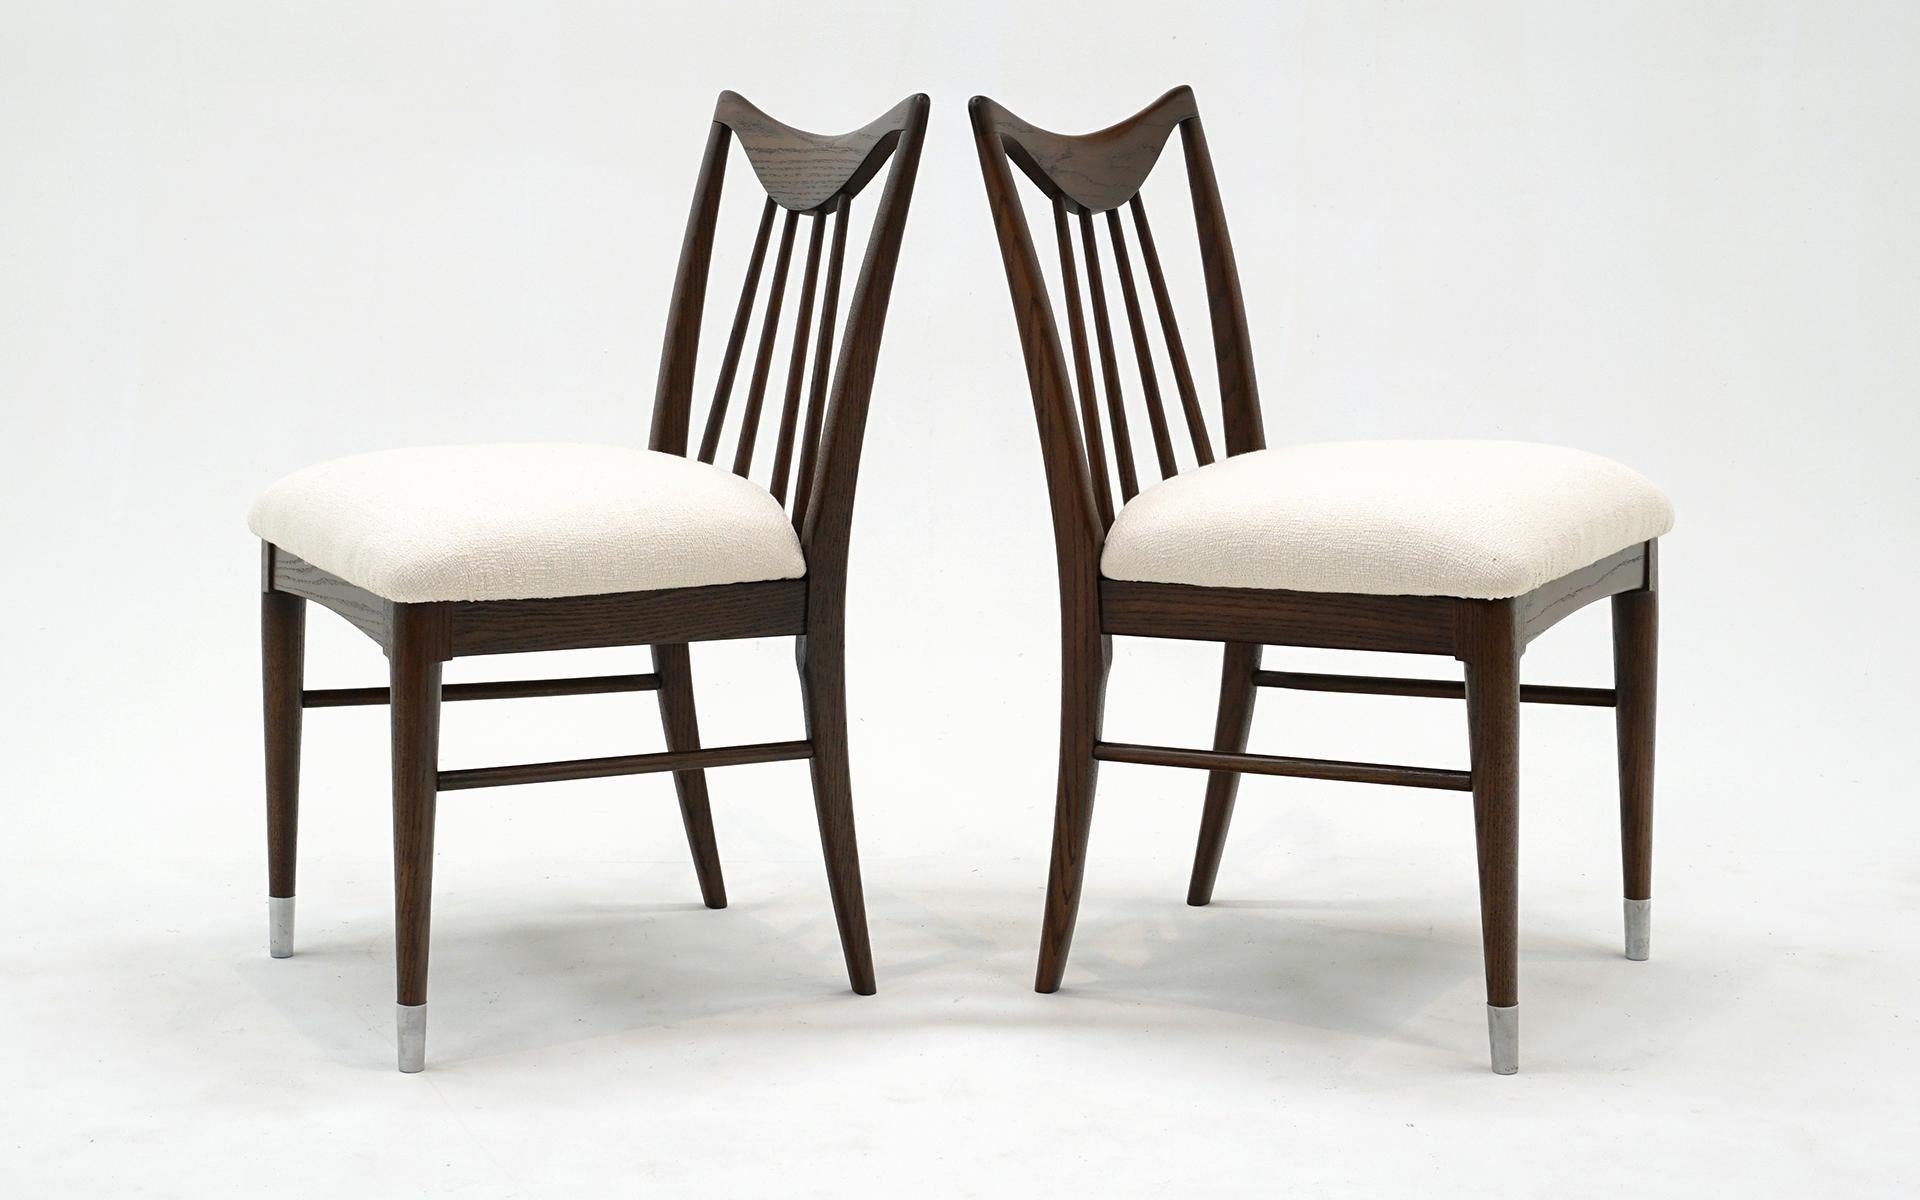 American Six Edmond Spence Dining Chairs for Keller. Restored. Walnut with Spindle Back